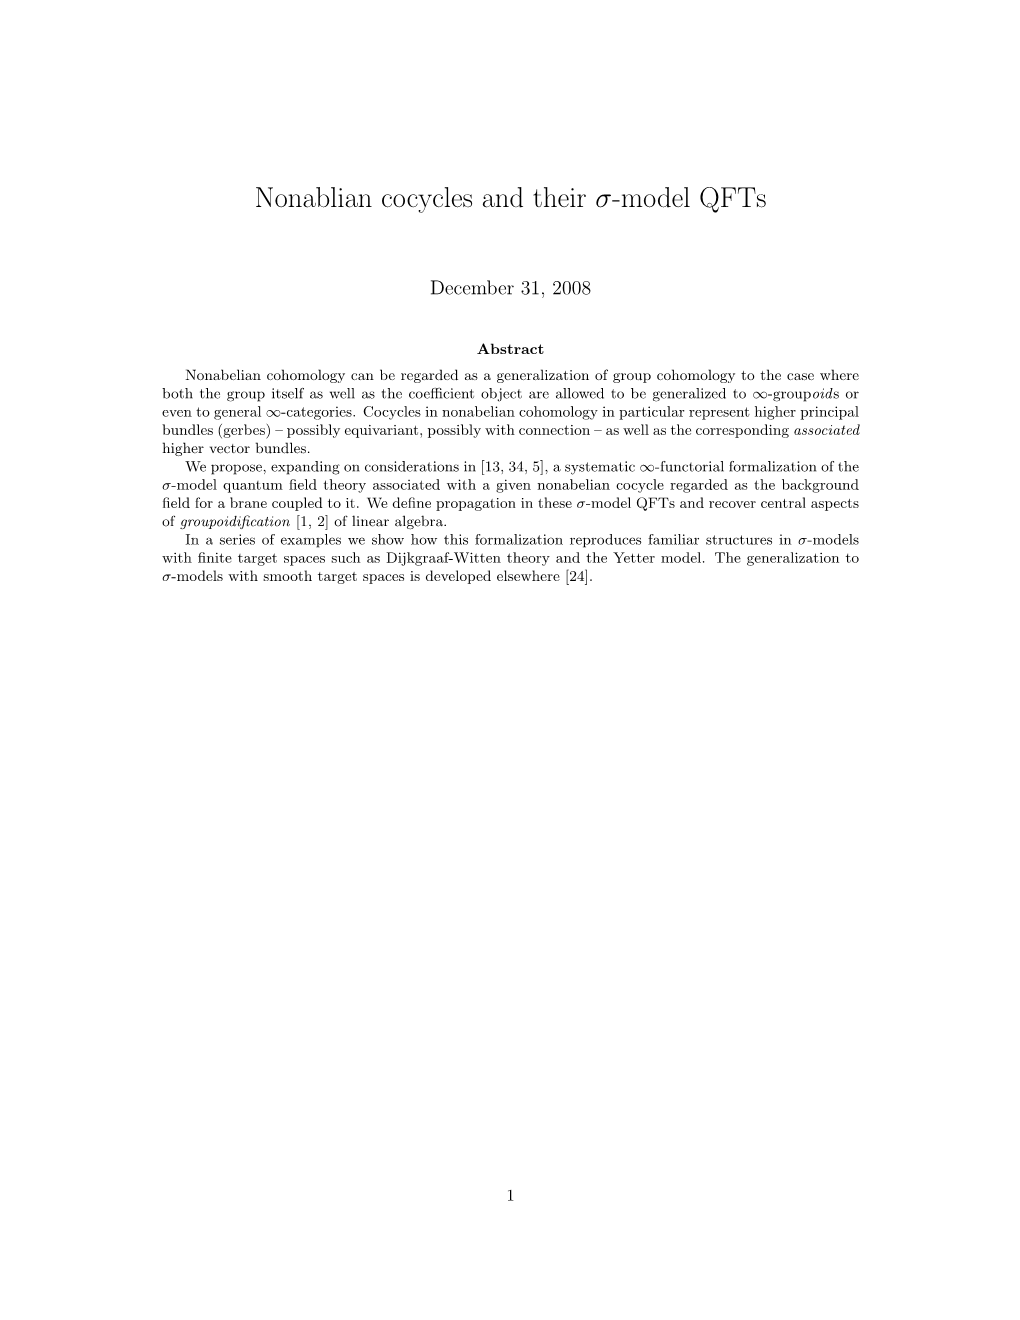 Nonablian Cocycles and Their Σ-Model Qfts